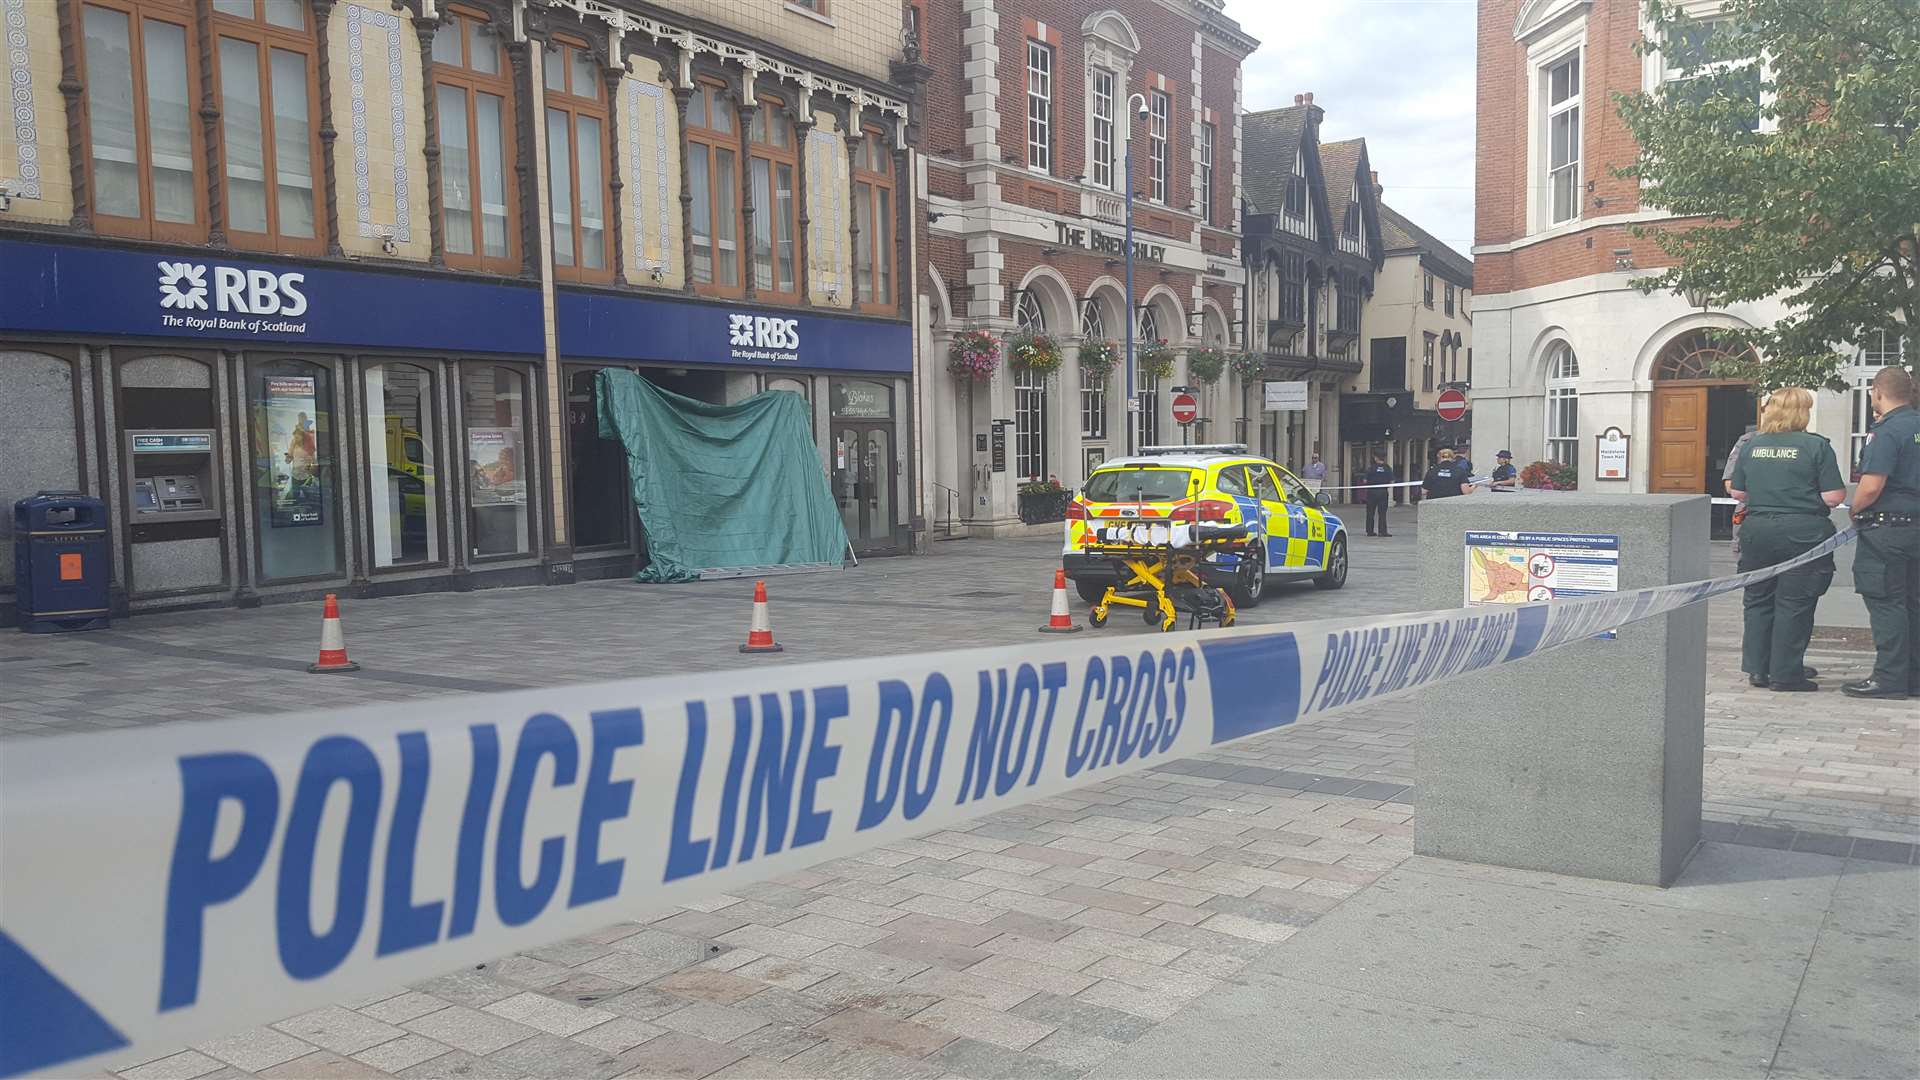 Police cordon outside RBS in Jubilee Square Maidstone after a man was found dead